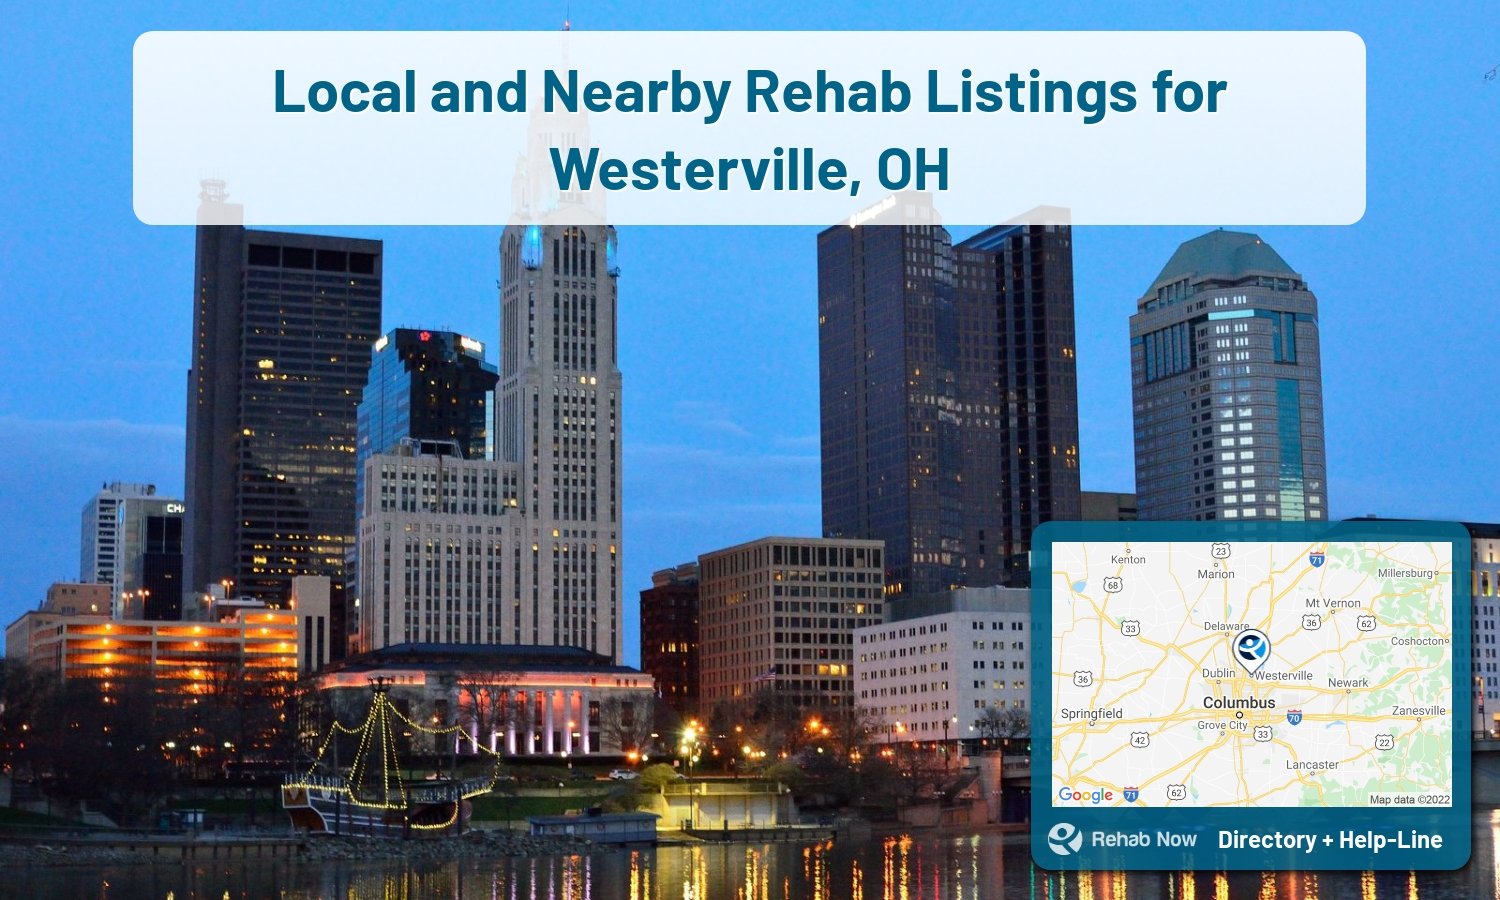 Need treatment nearby in Westerville, Ohio? Choose a drug/alcohol rehab center from our list, or call our hotline now for free help.